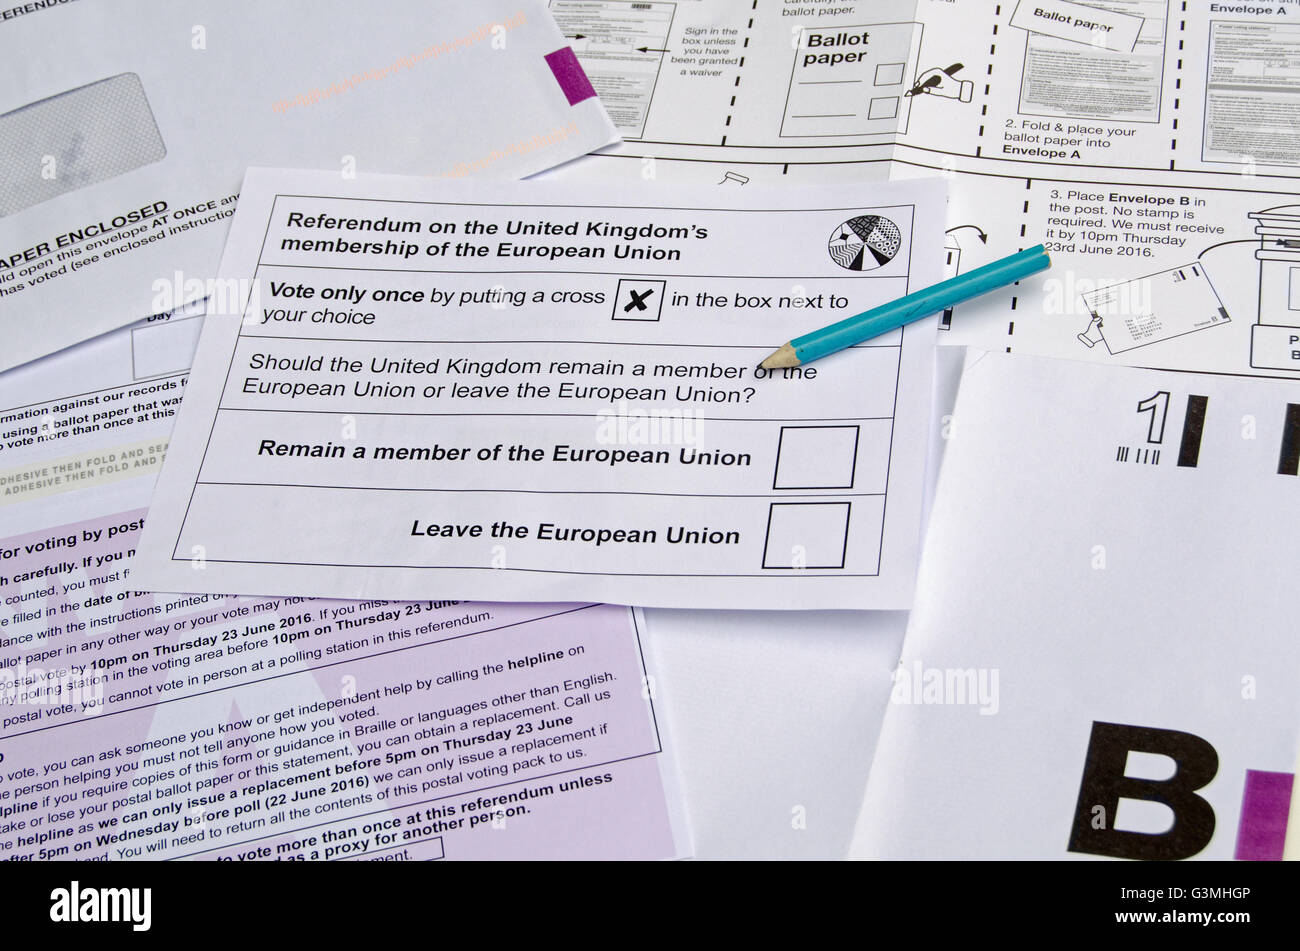 BASINGSTOKE, UK - JUNE 13, 2016: Postal ballot paper and envelopes for the UK Referendum on whether to remain in or leave the European Union. Stock Photo